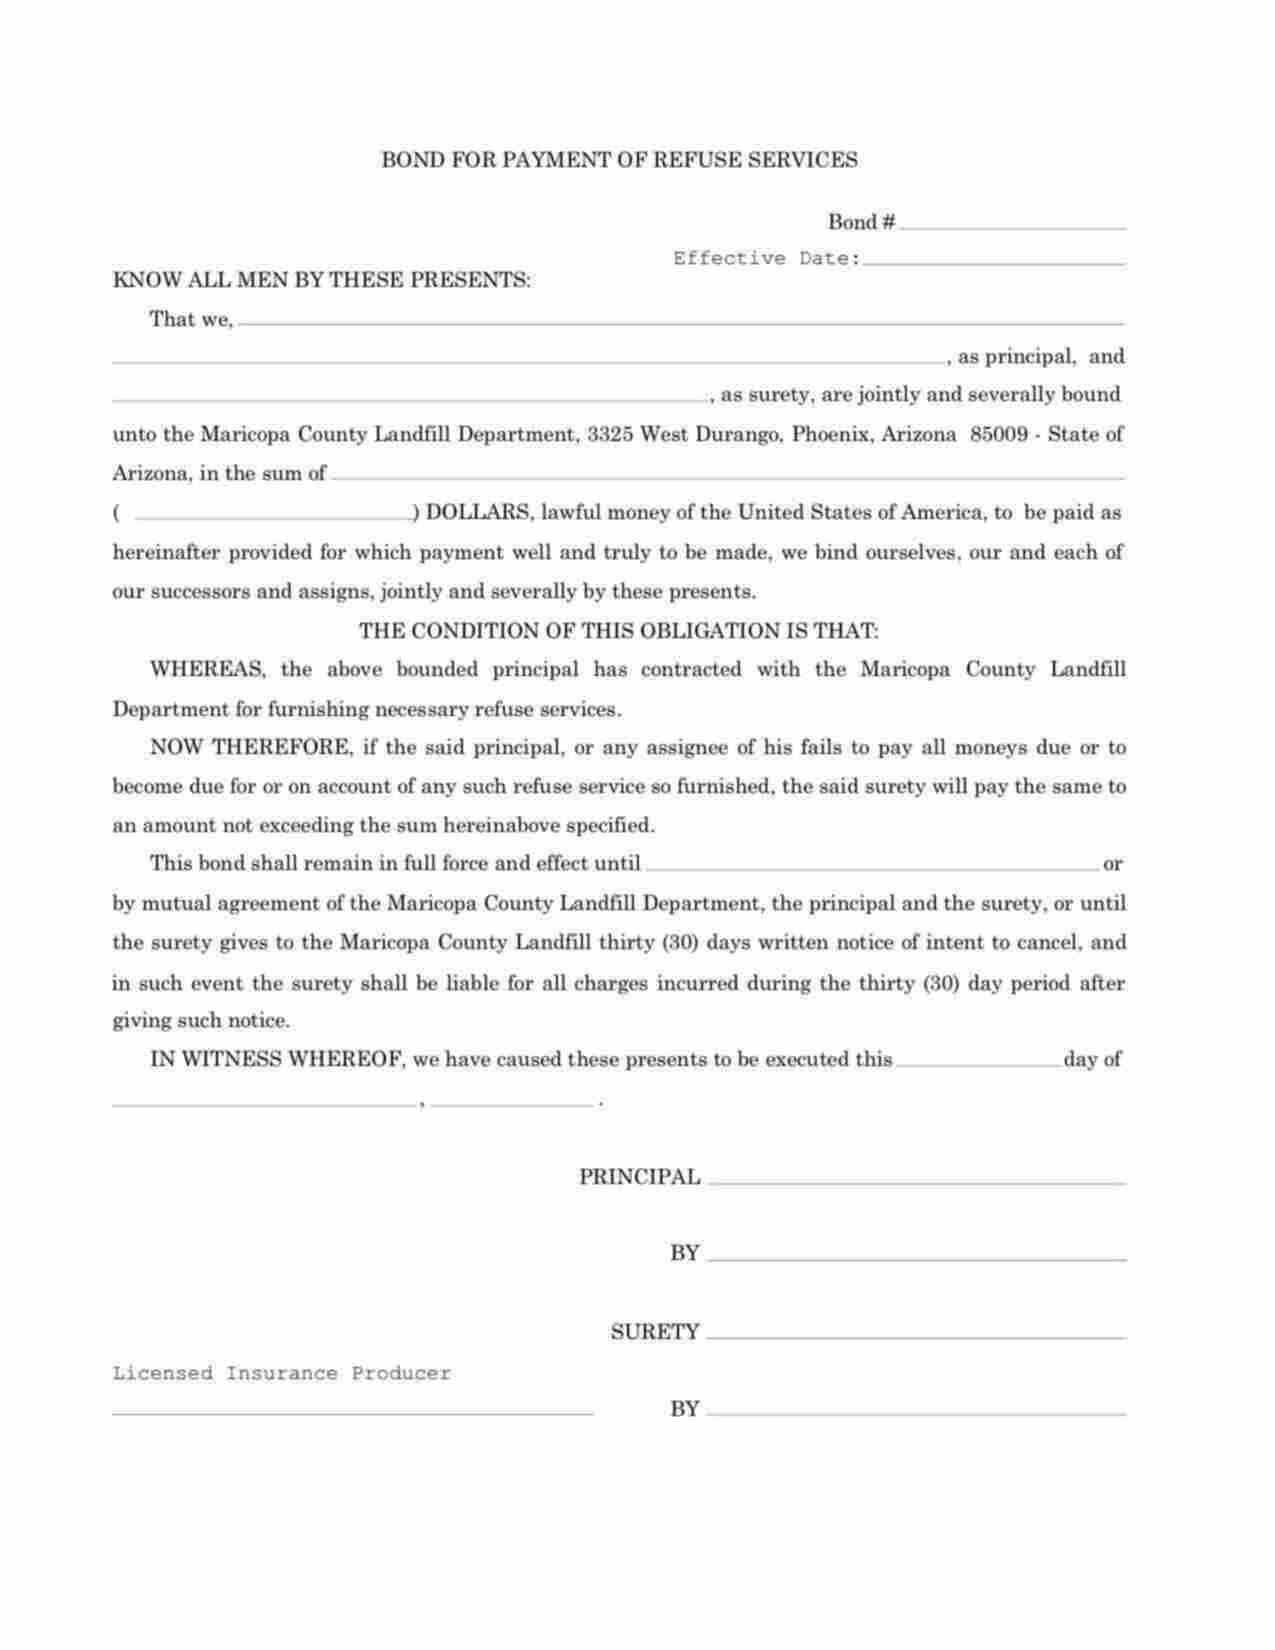 Arizona Payment of Refuse Services Bond Form